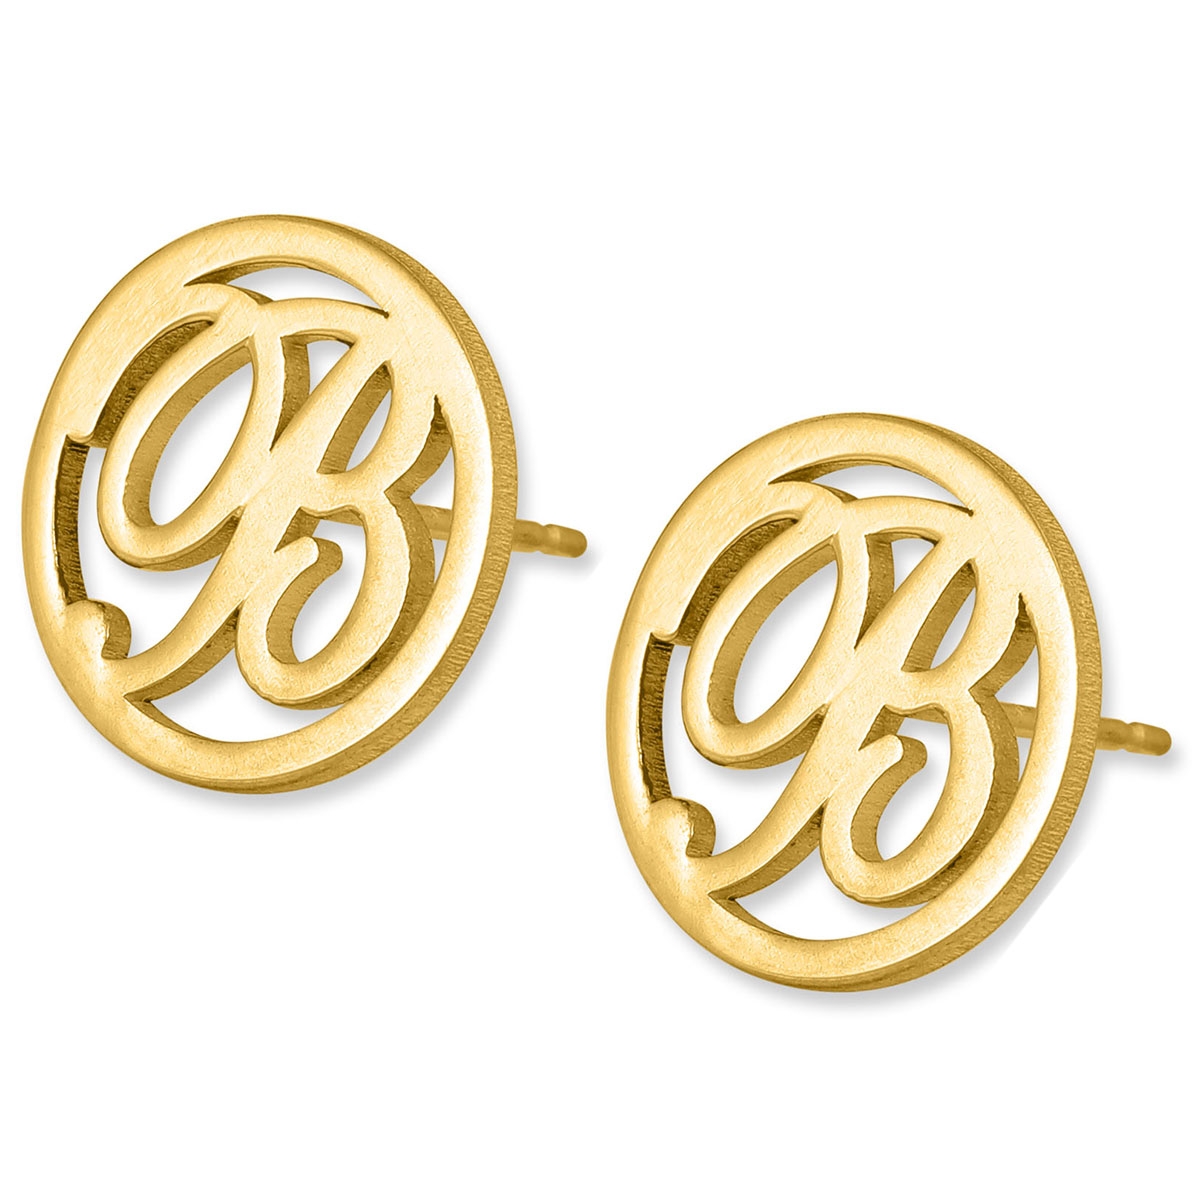 24k Gold Plated Silver Circular Personalized Initials Stud Earrings - 1